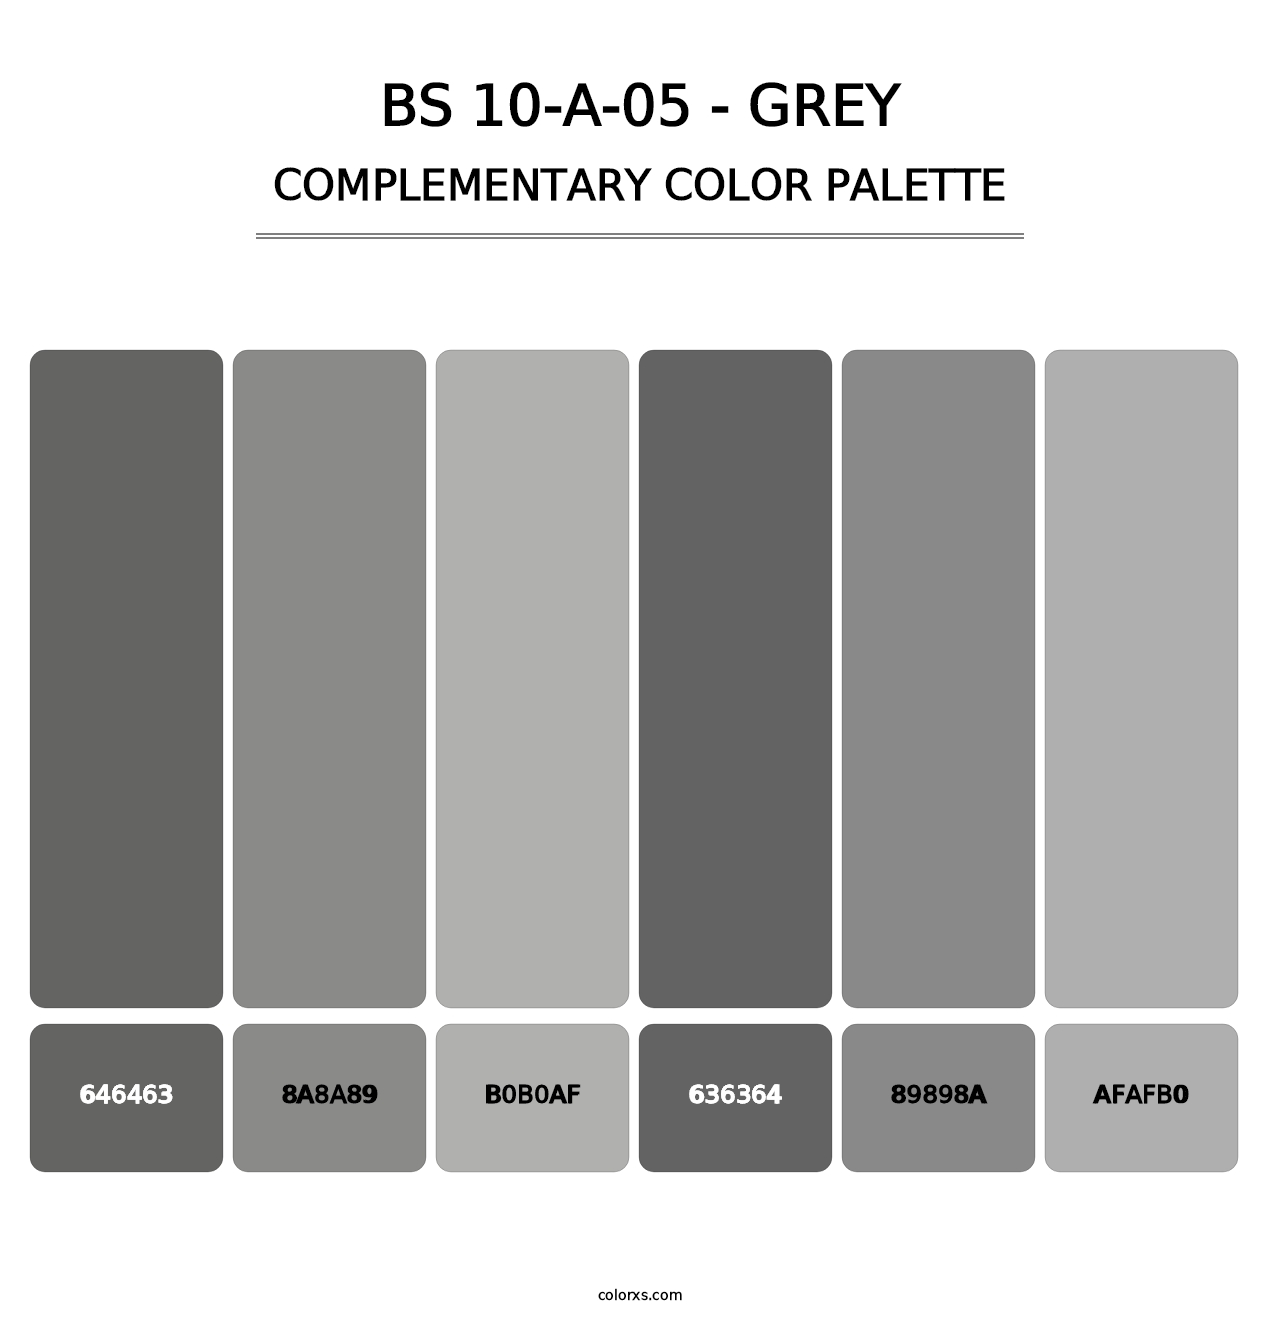 BS 10-A-05 - Grey - Complementary Color Palette